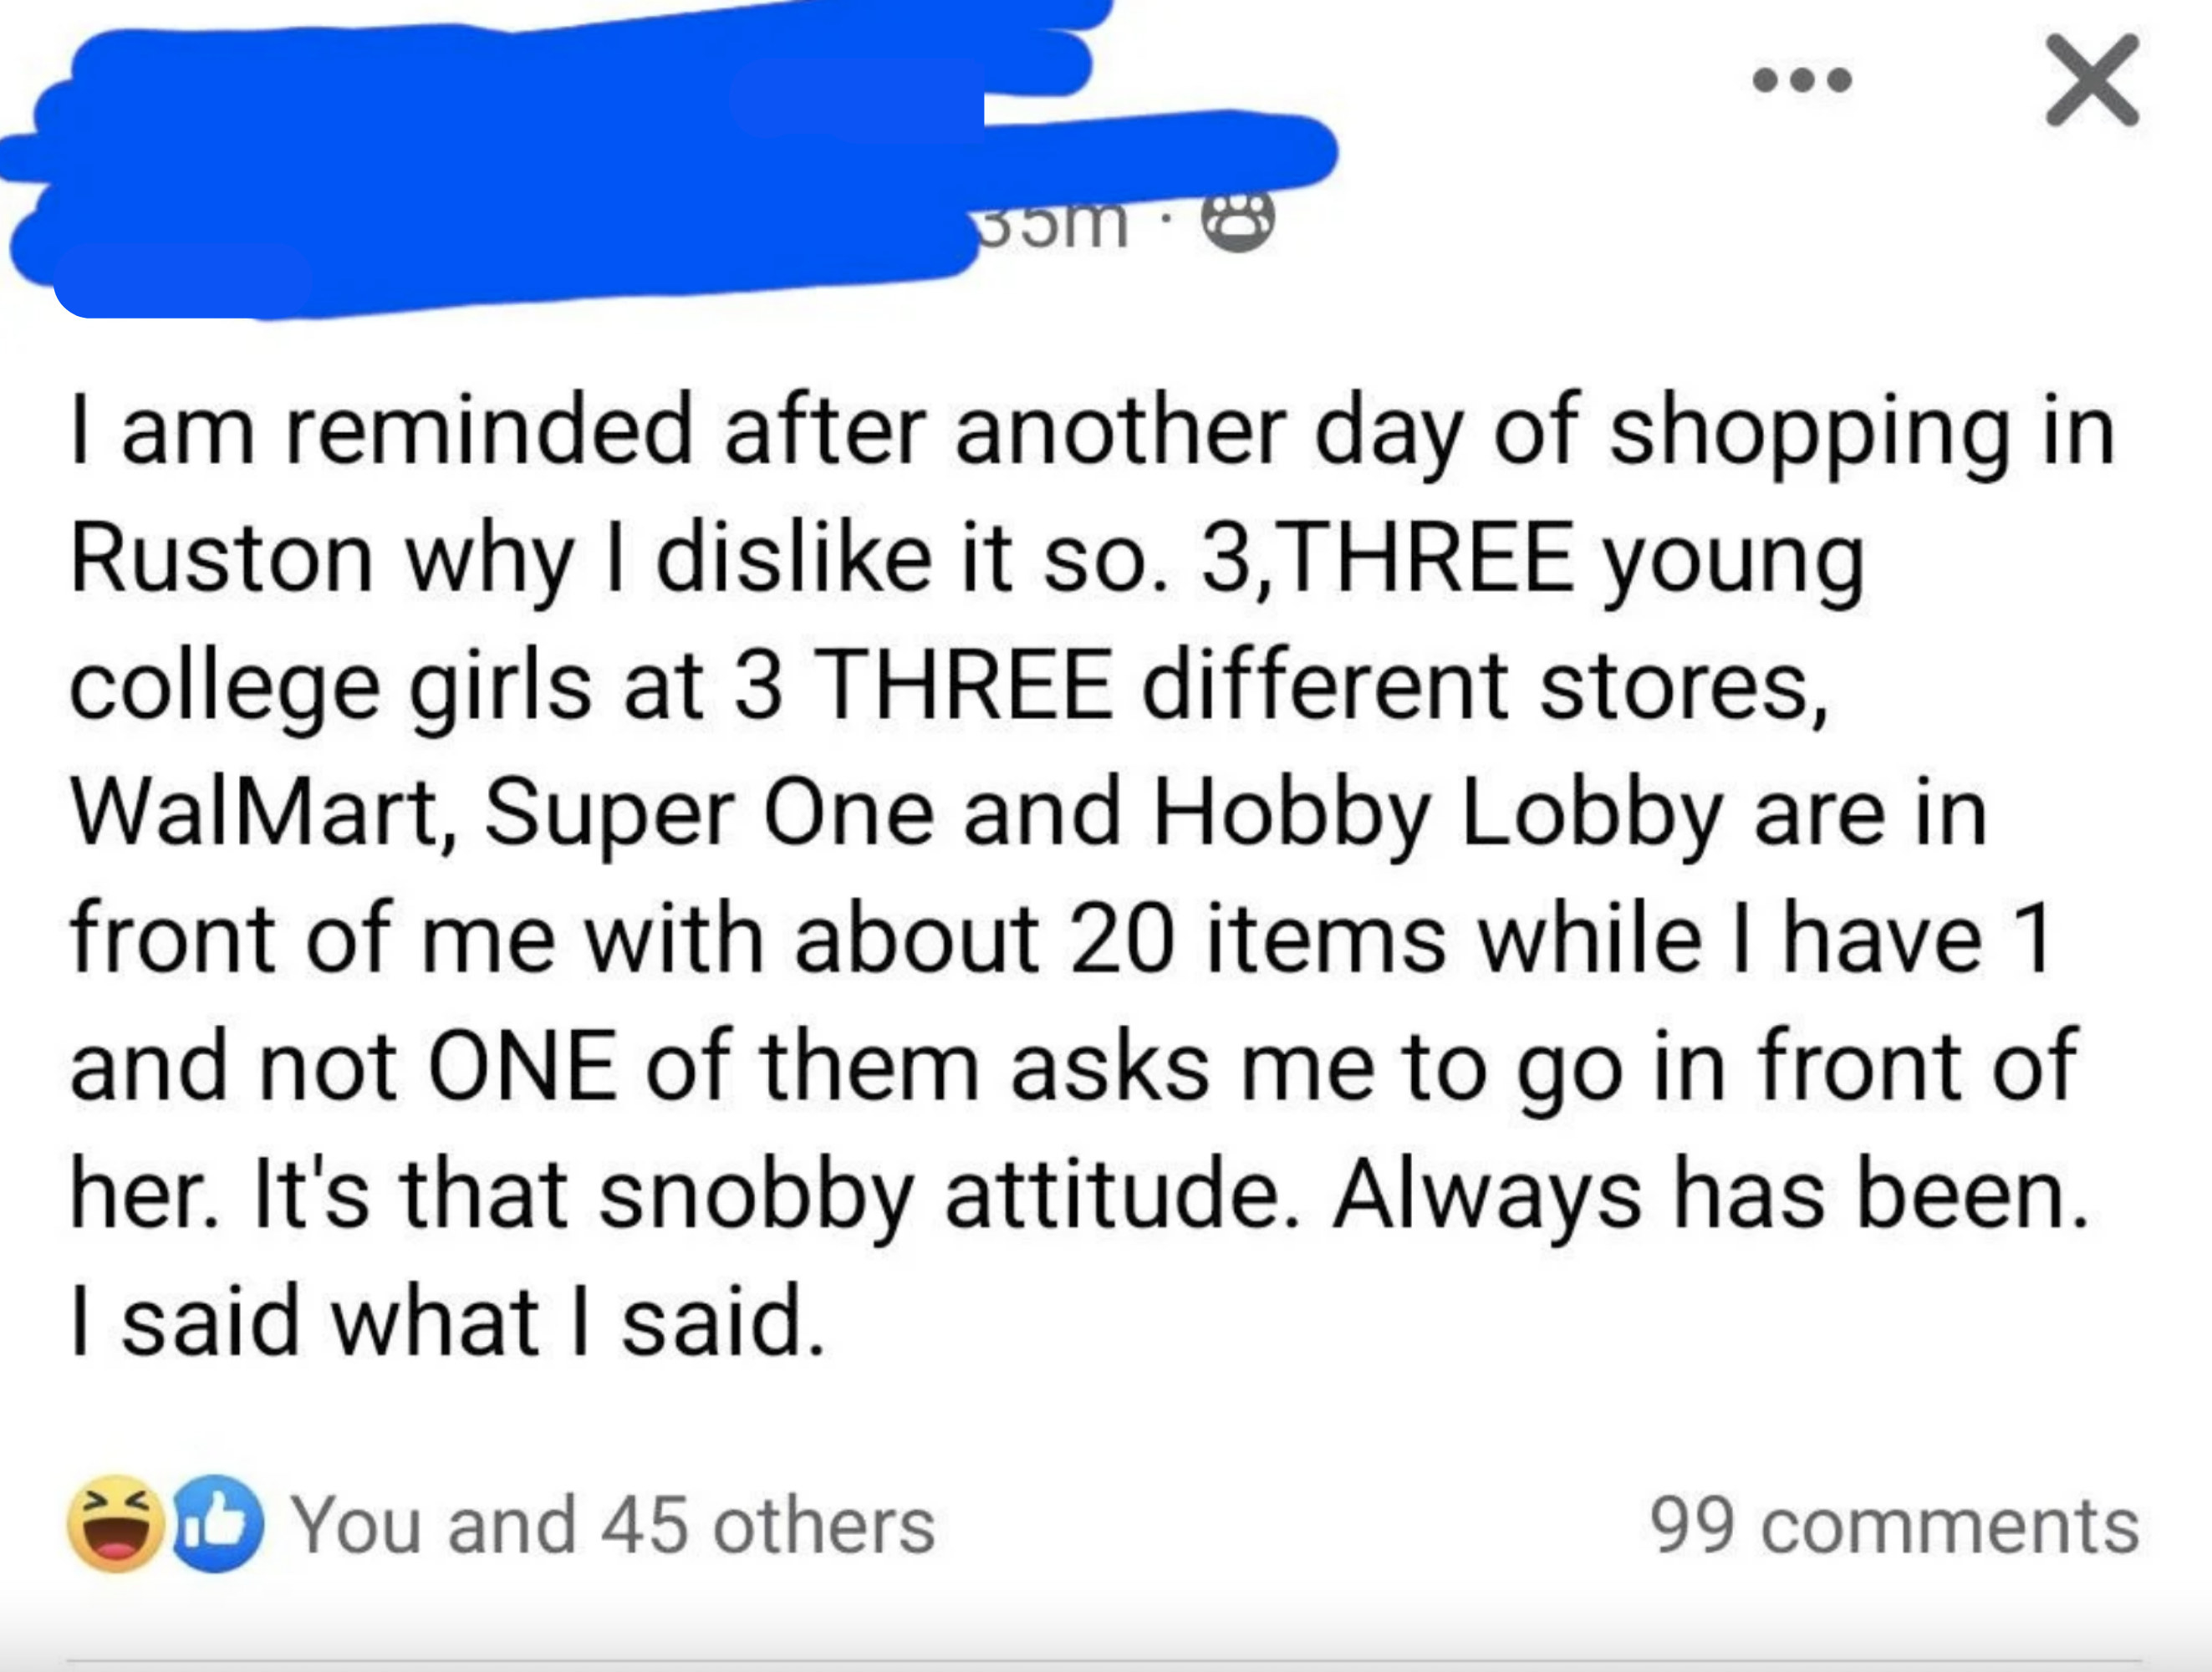 Person with 1 item complains about &quot;3 young college girls at 3 different stores, Walmart, Super One and Hobby Lobby,&quot; in front of them with about 20 items, and not one would let them go in front of her